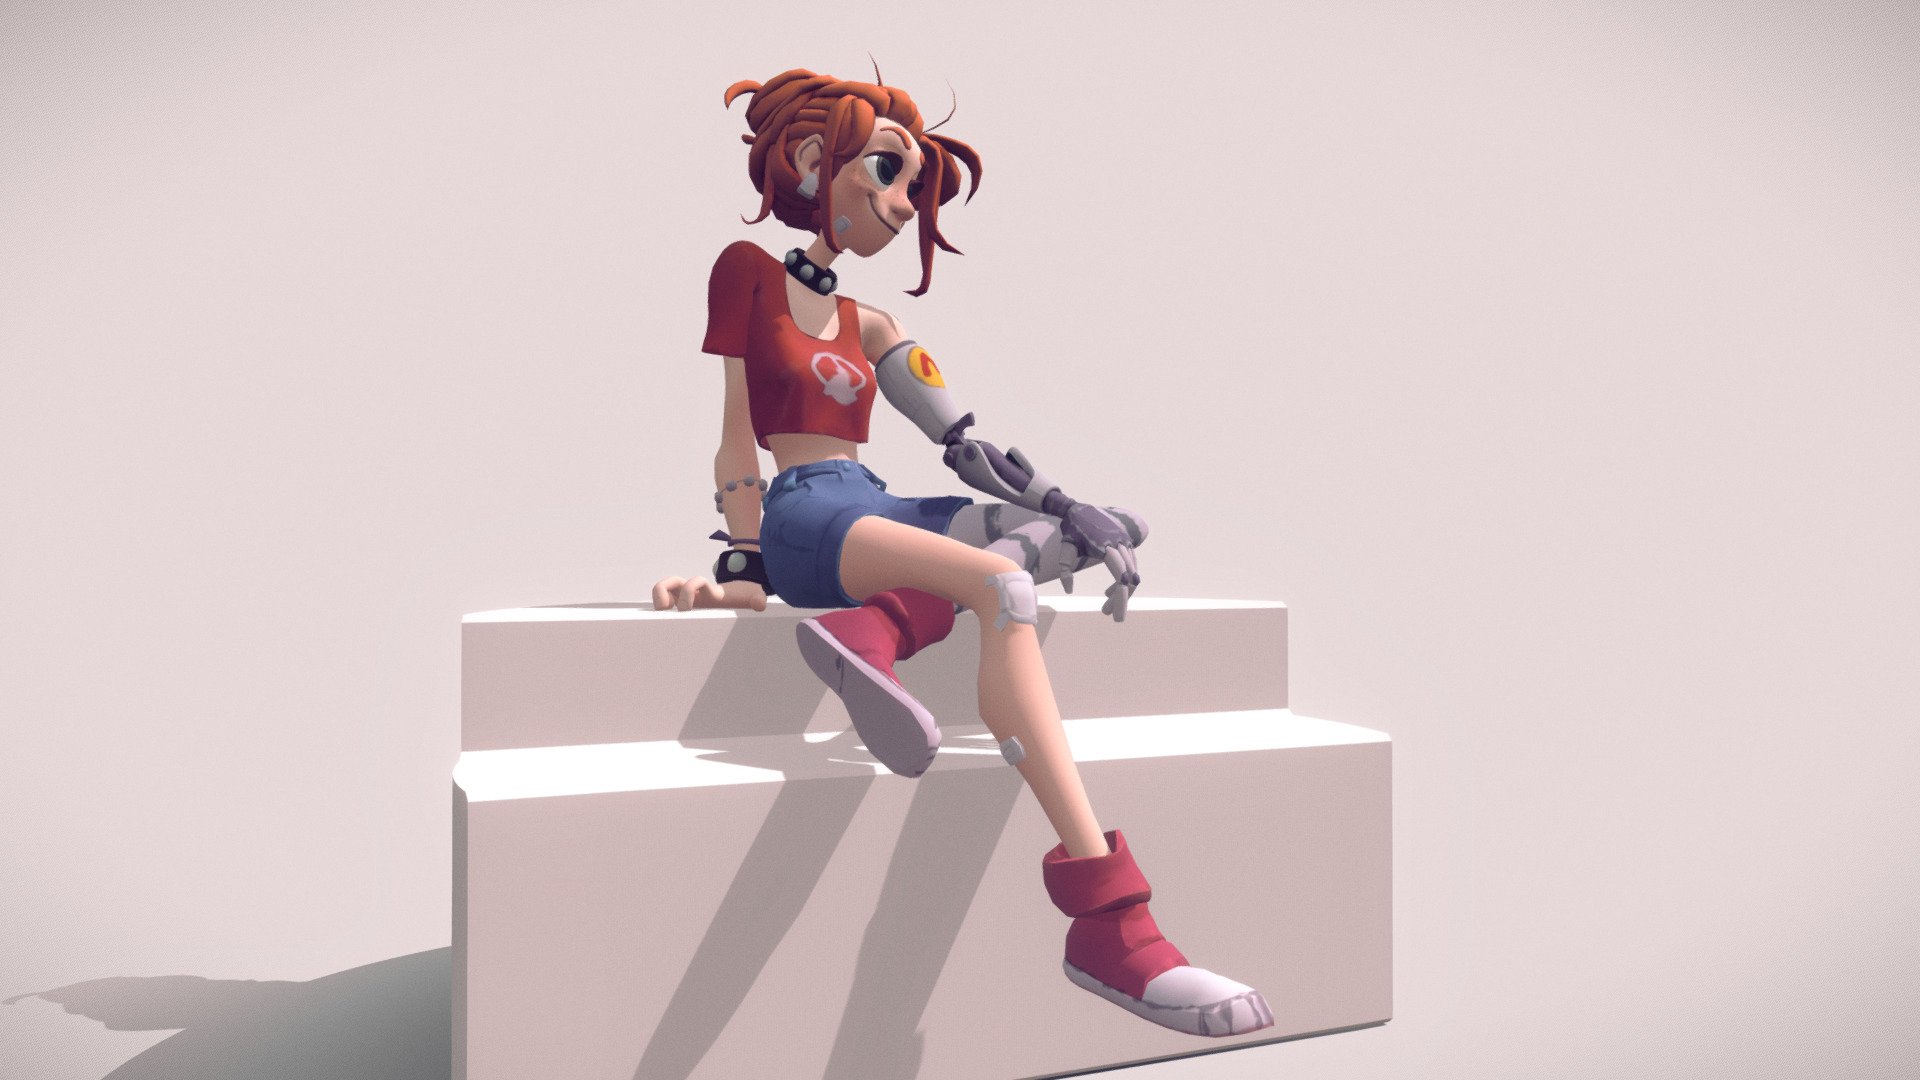 This is a game-ready 3D model I made of SnuffyMcSnuff's Gaige artwork. They're a fantastic artist, please go follow them! - Gaige - SnuffyMcSnuff - 3D model by Fwiller 3d model